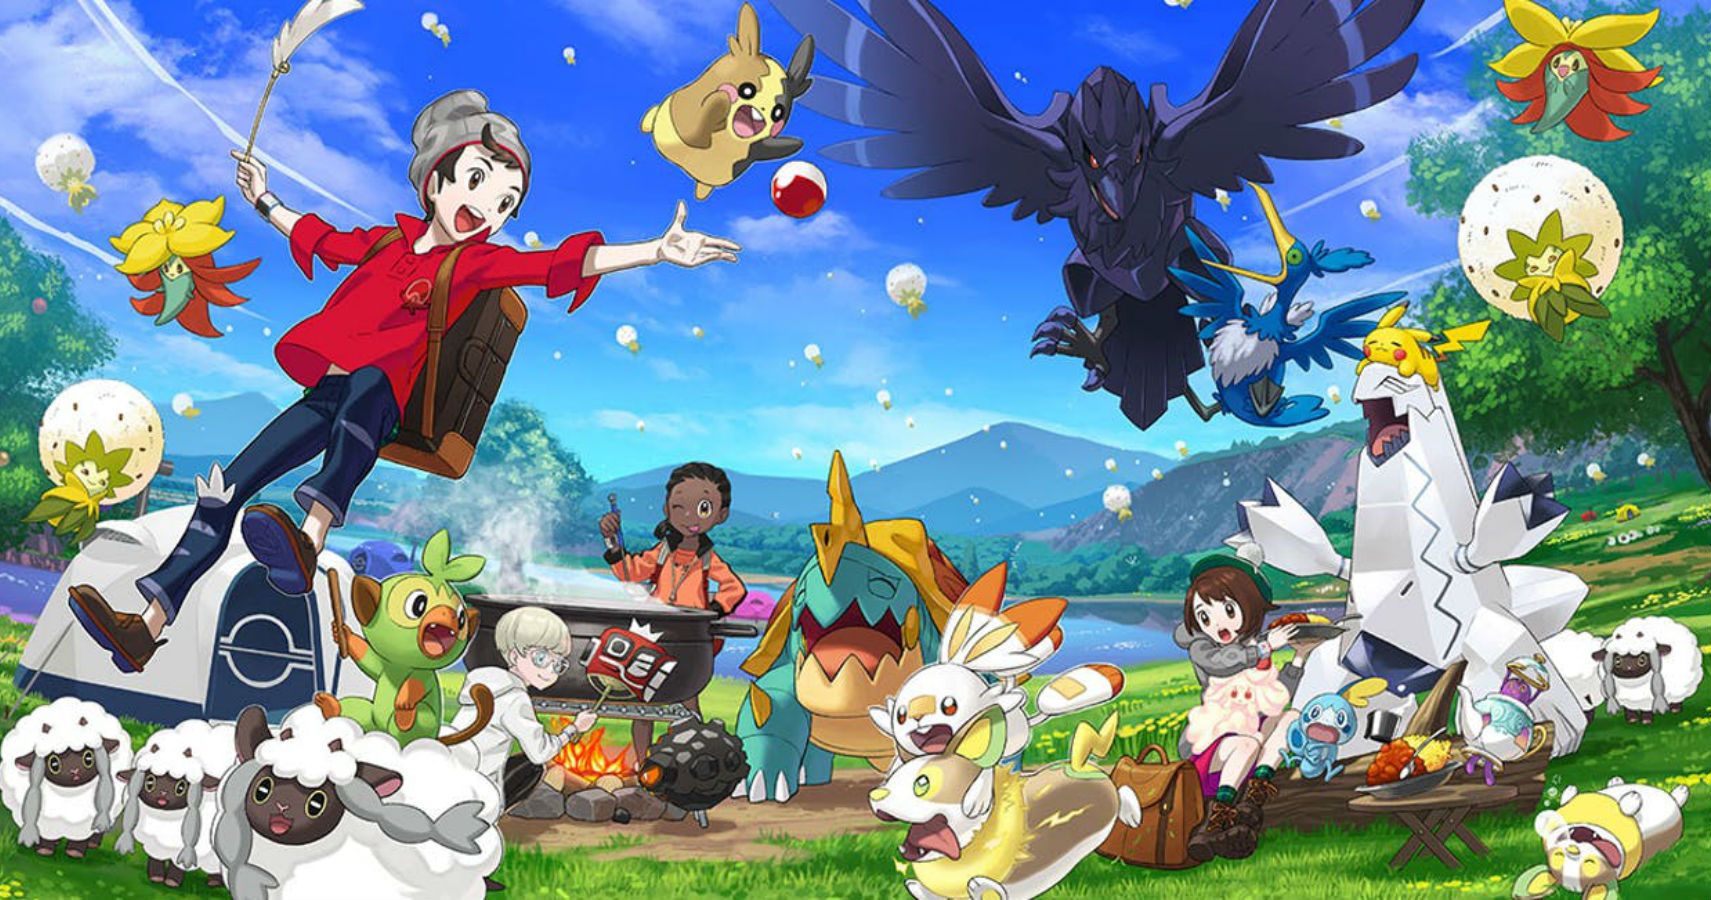 Pokémon Sword & Shield Will Have At Least 500 Pokémon Guidebook Suggests